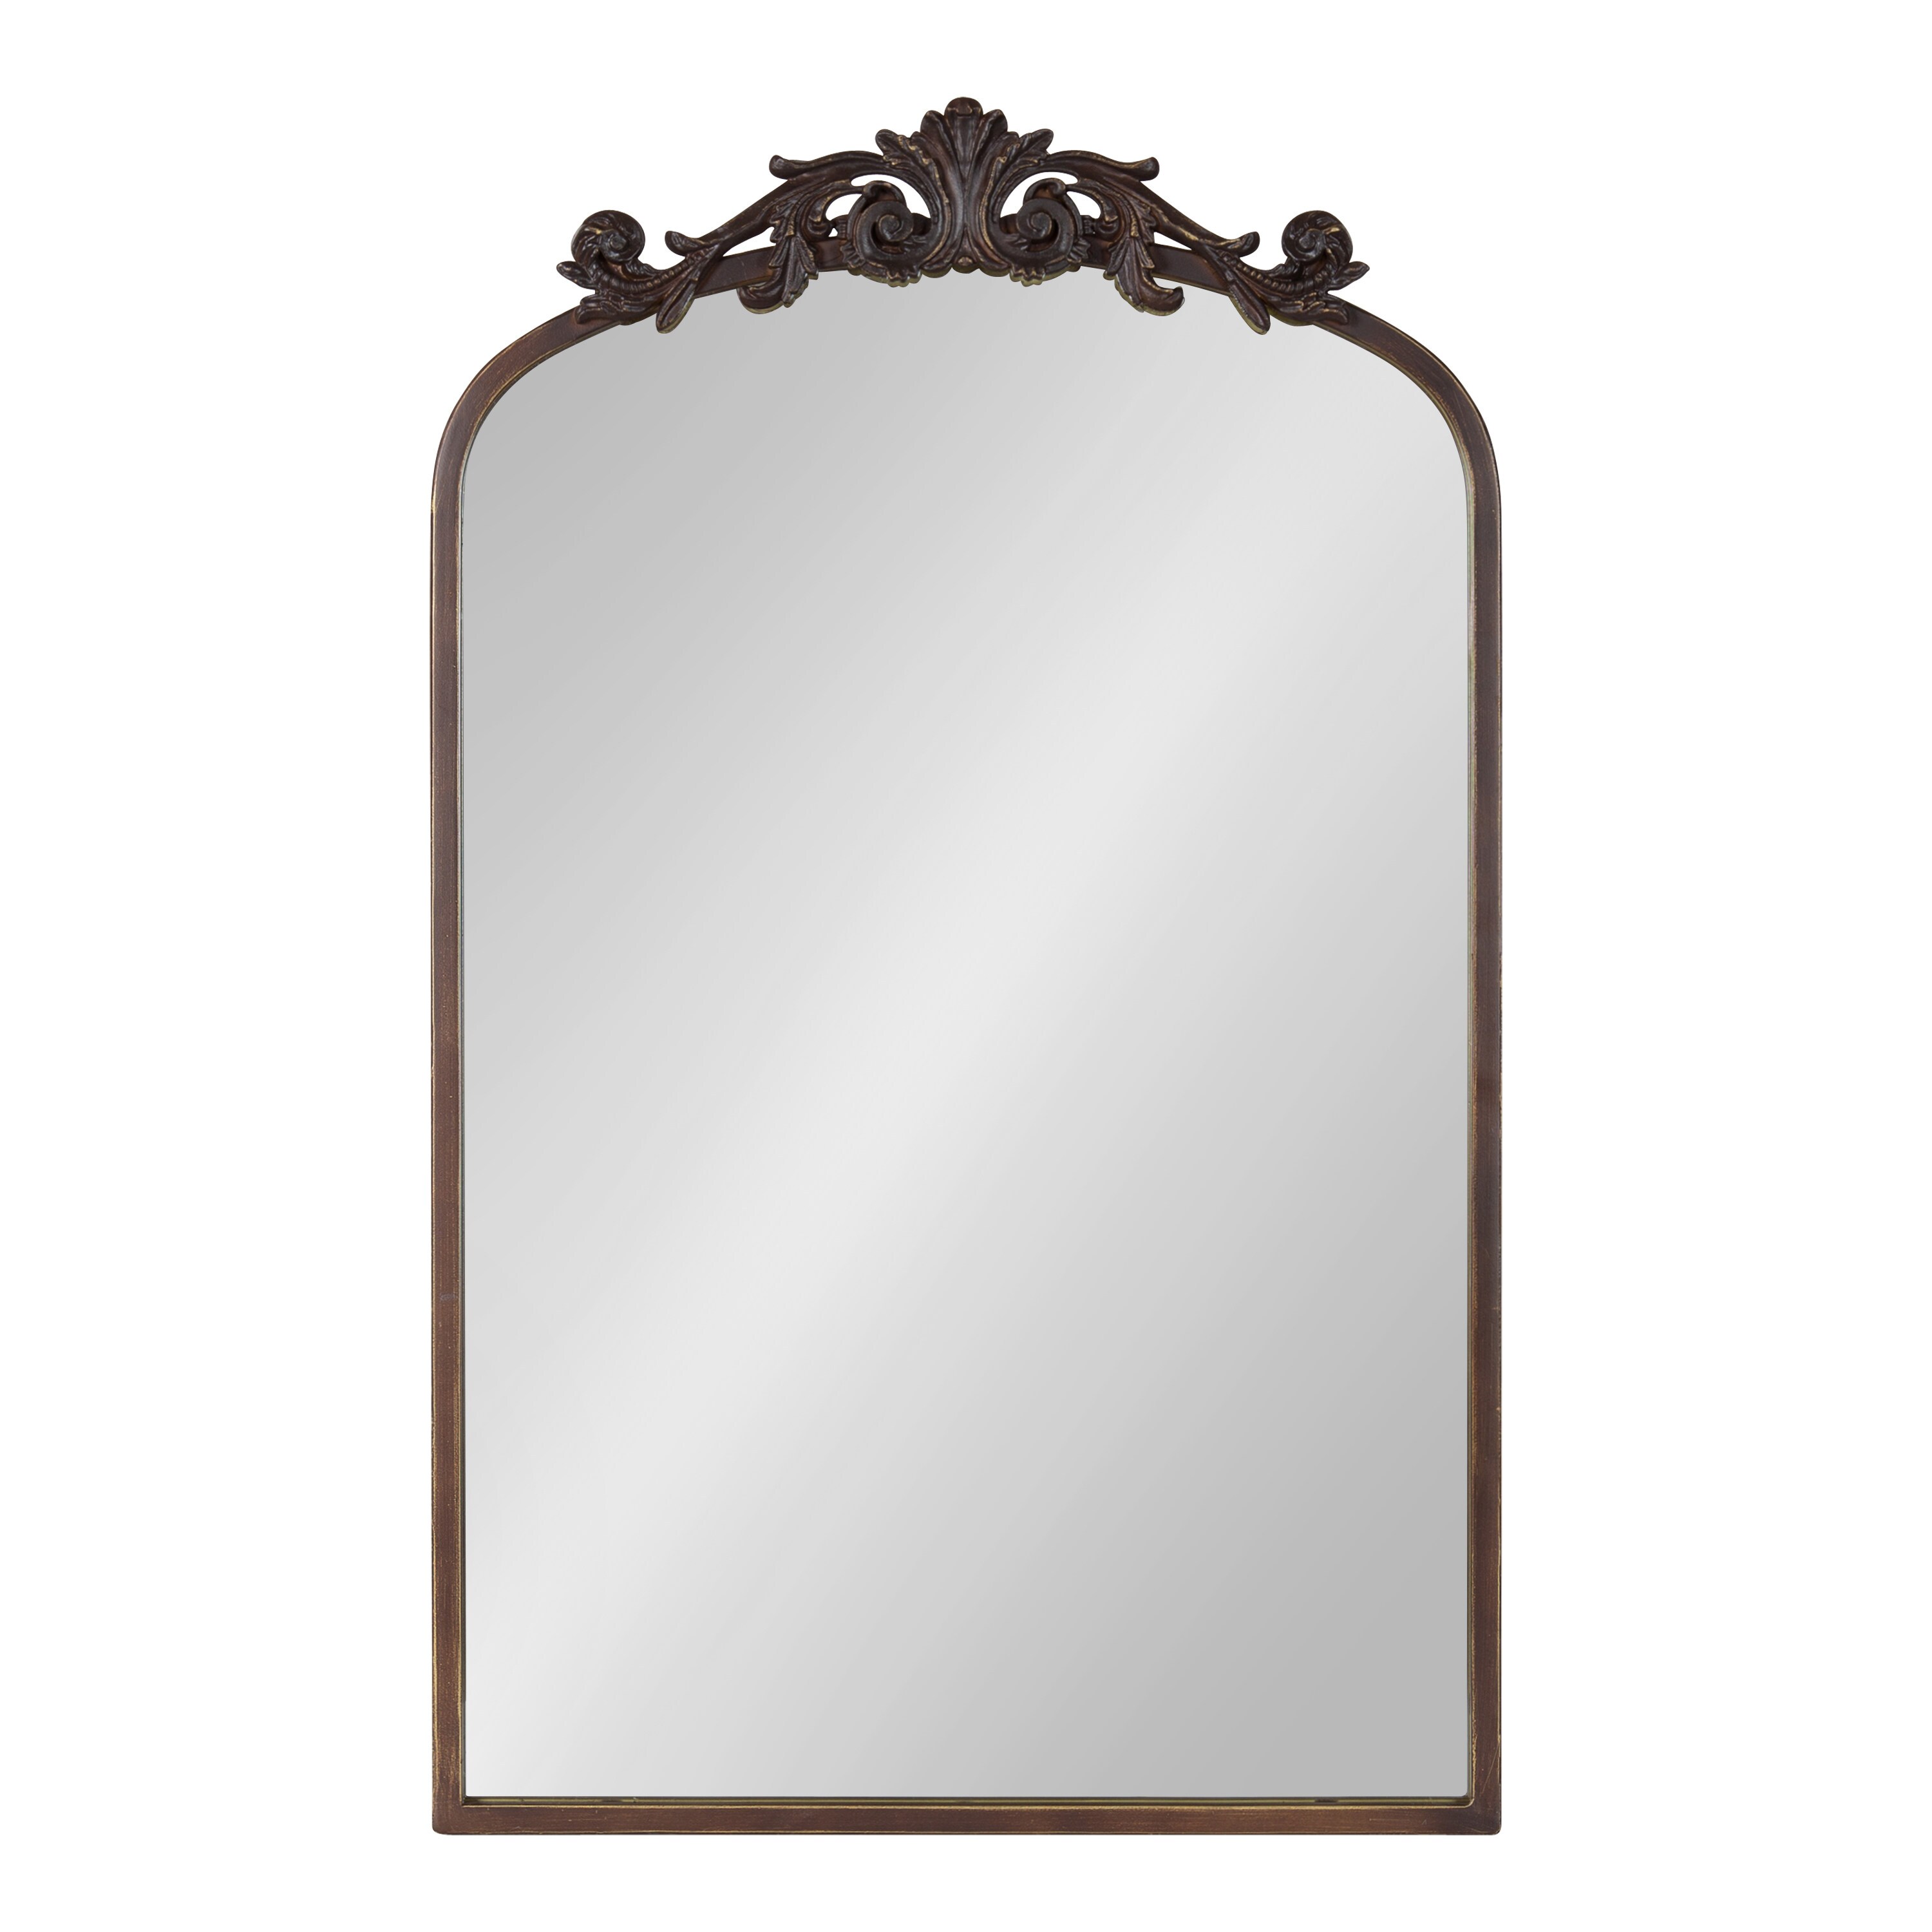 Bronze Arch Mirrors at Lowes.com